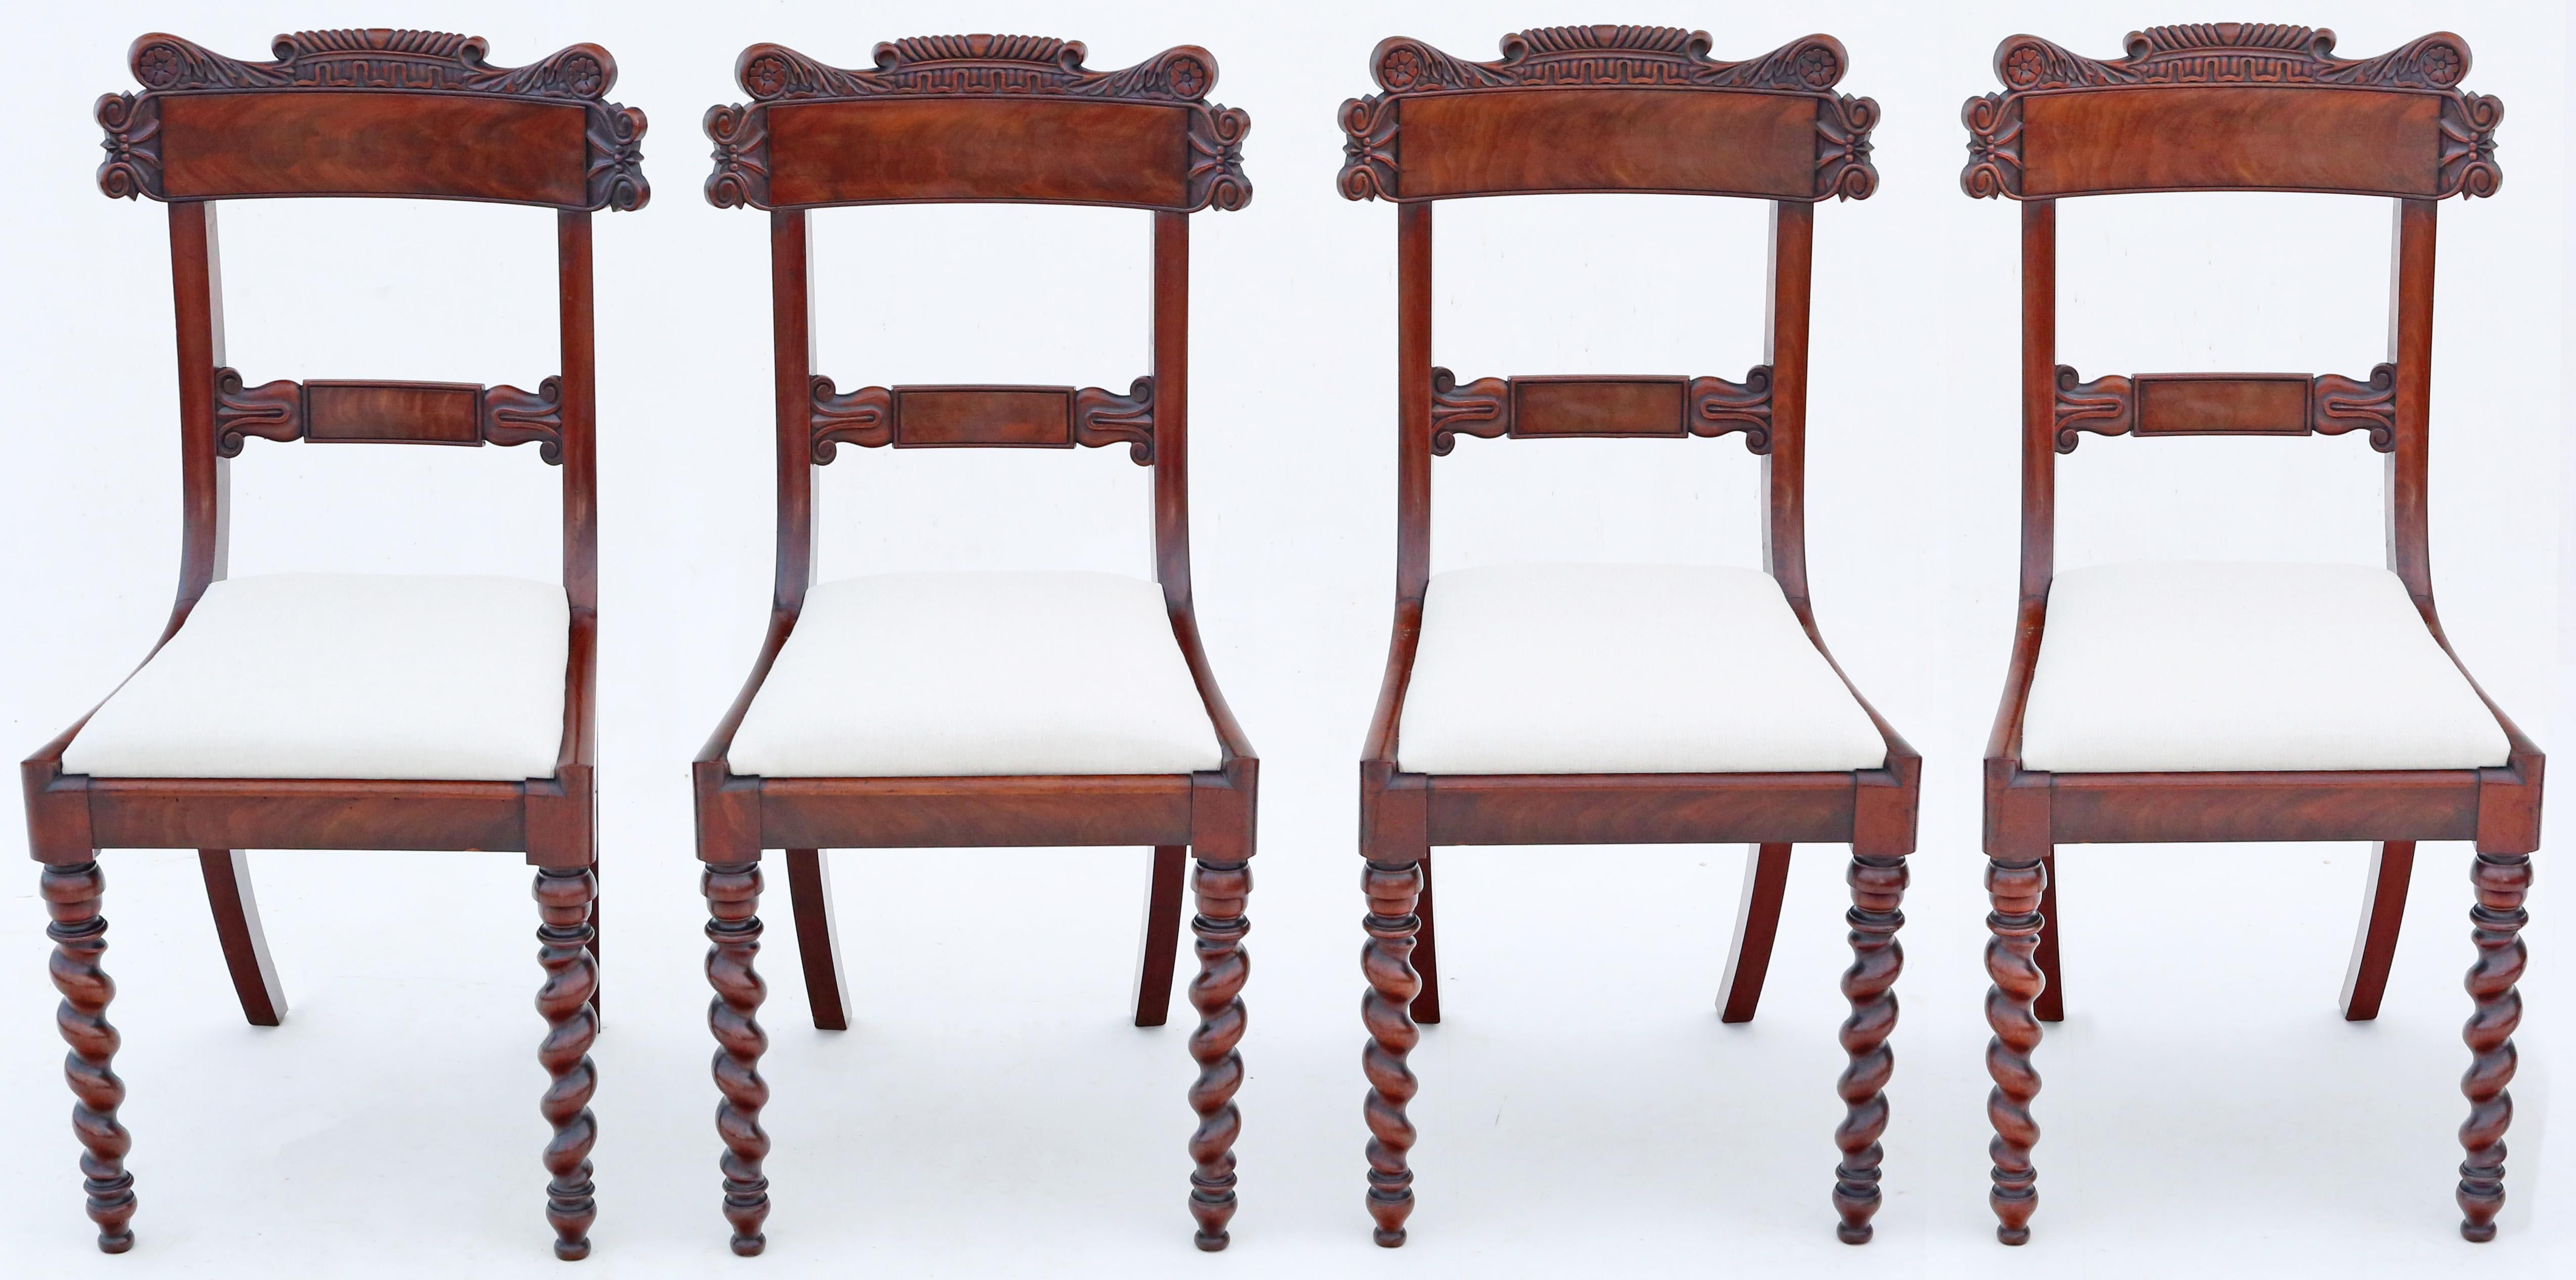 Antique fine quality set of 4 Regency / William IV mahogany dining chairs C1830.

No loose joints.

New professional upholstery.

Fantastic carved backs and tapered twist front legs.

Overall maximum dimensions: 47cmW x 51cmD x 94cmH (46cmH seat